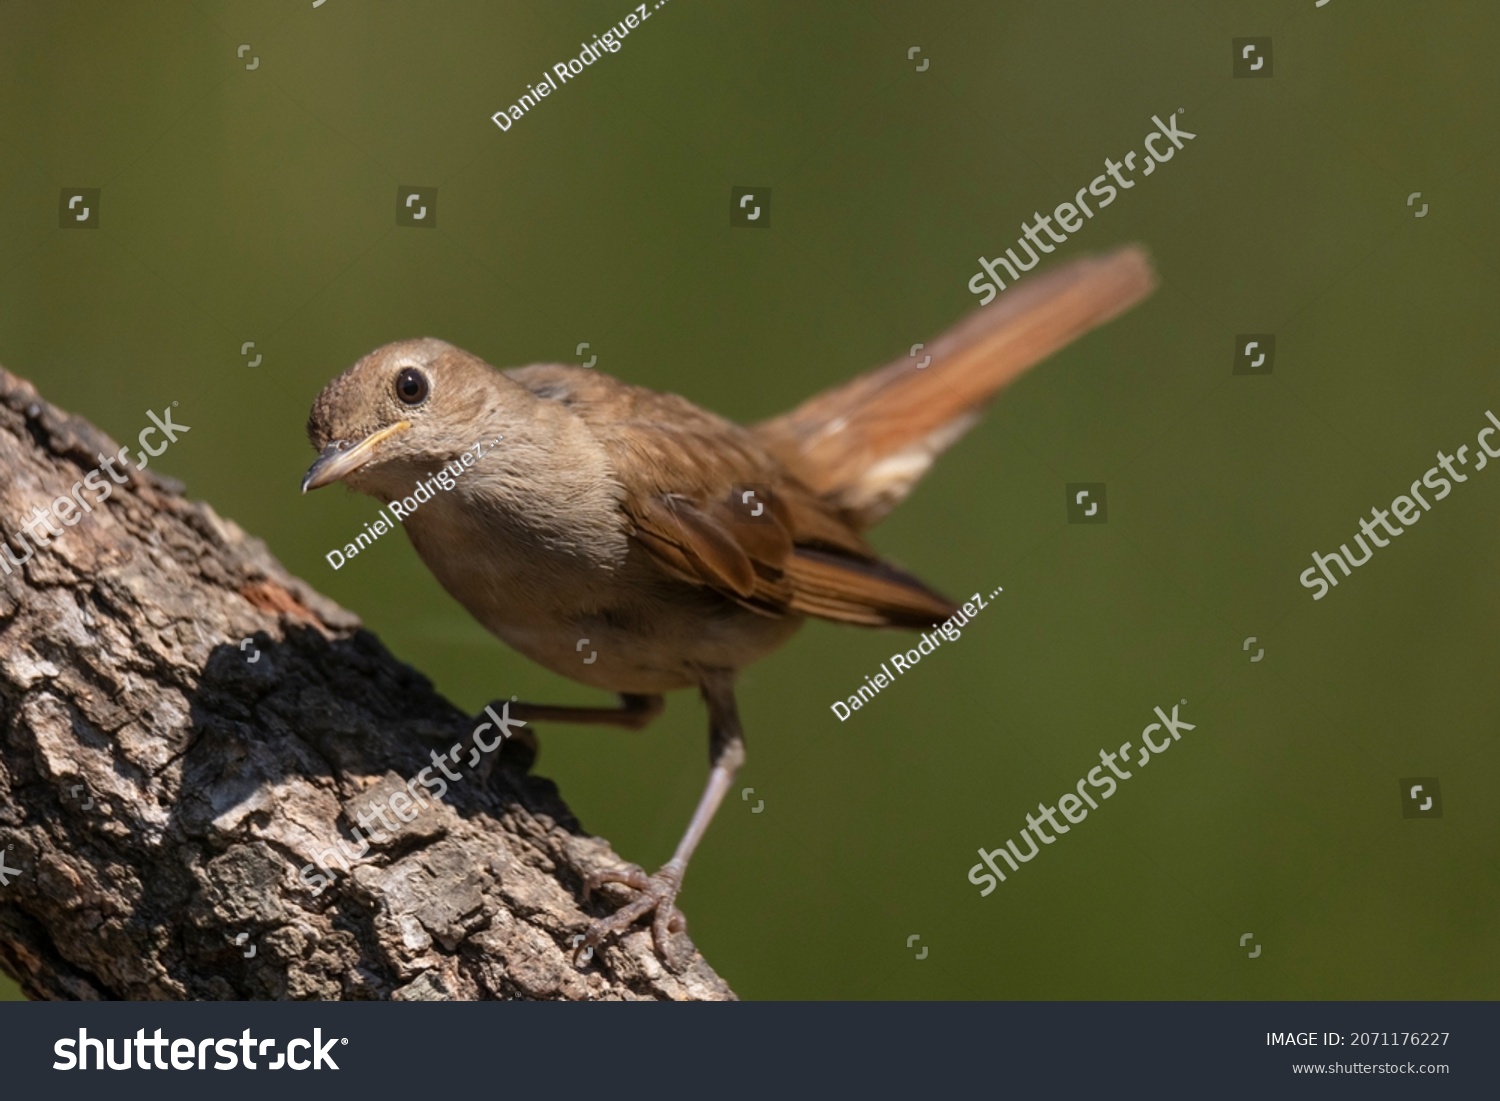 Nightingale perched in profile on a branch, looking at the camera. With green background out of focus. Horizontal image. The bird illuminated by the sun. Animal concept. #2071176227